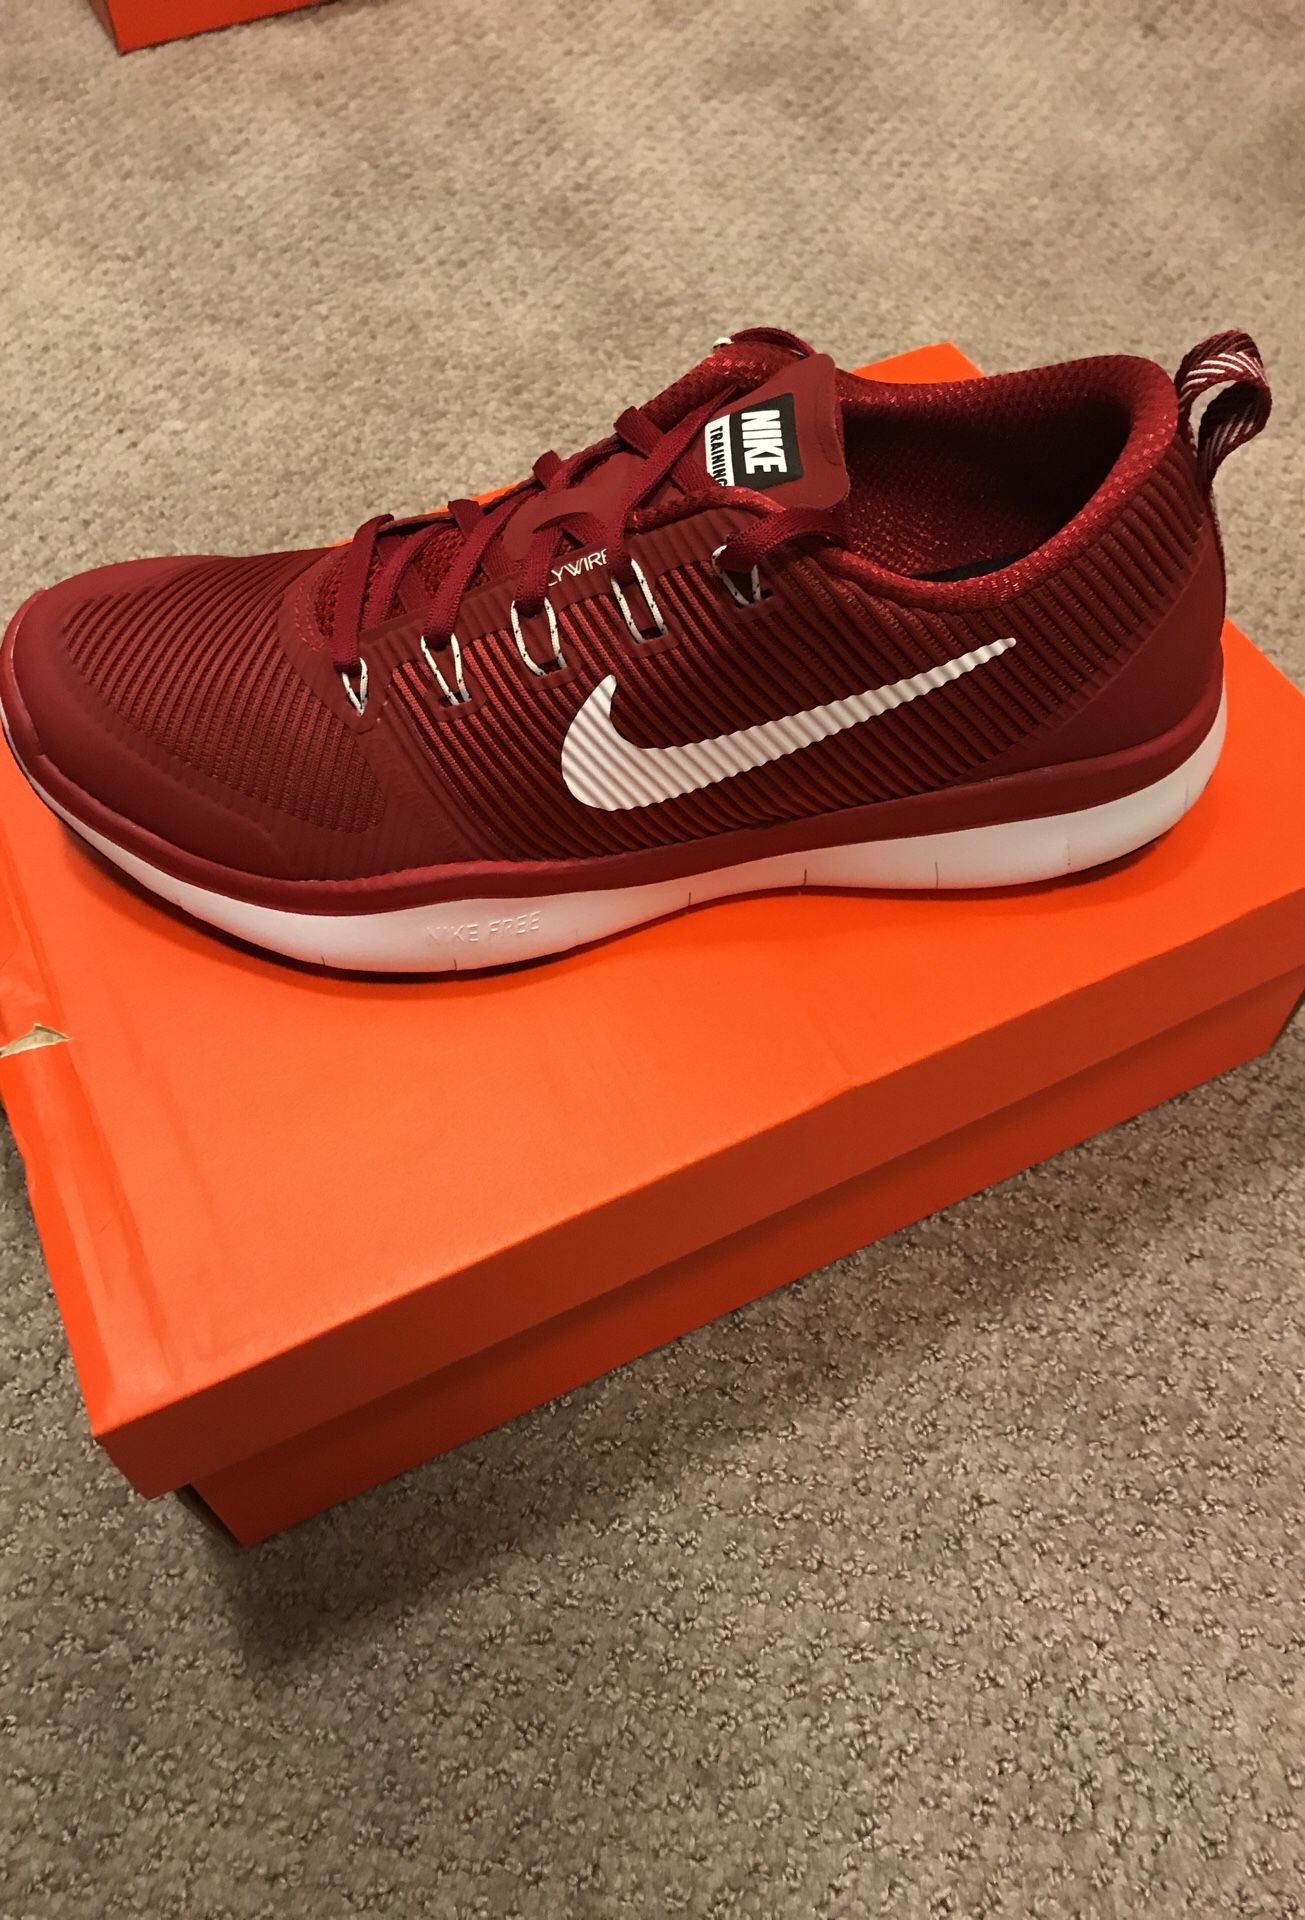 nadar Tomar medicina Querer Nike Free Train Versatility TB Trainers for Sale in Campbell, CA - OfferUp